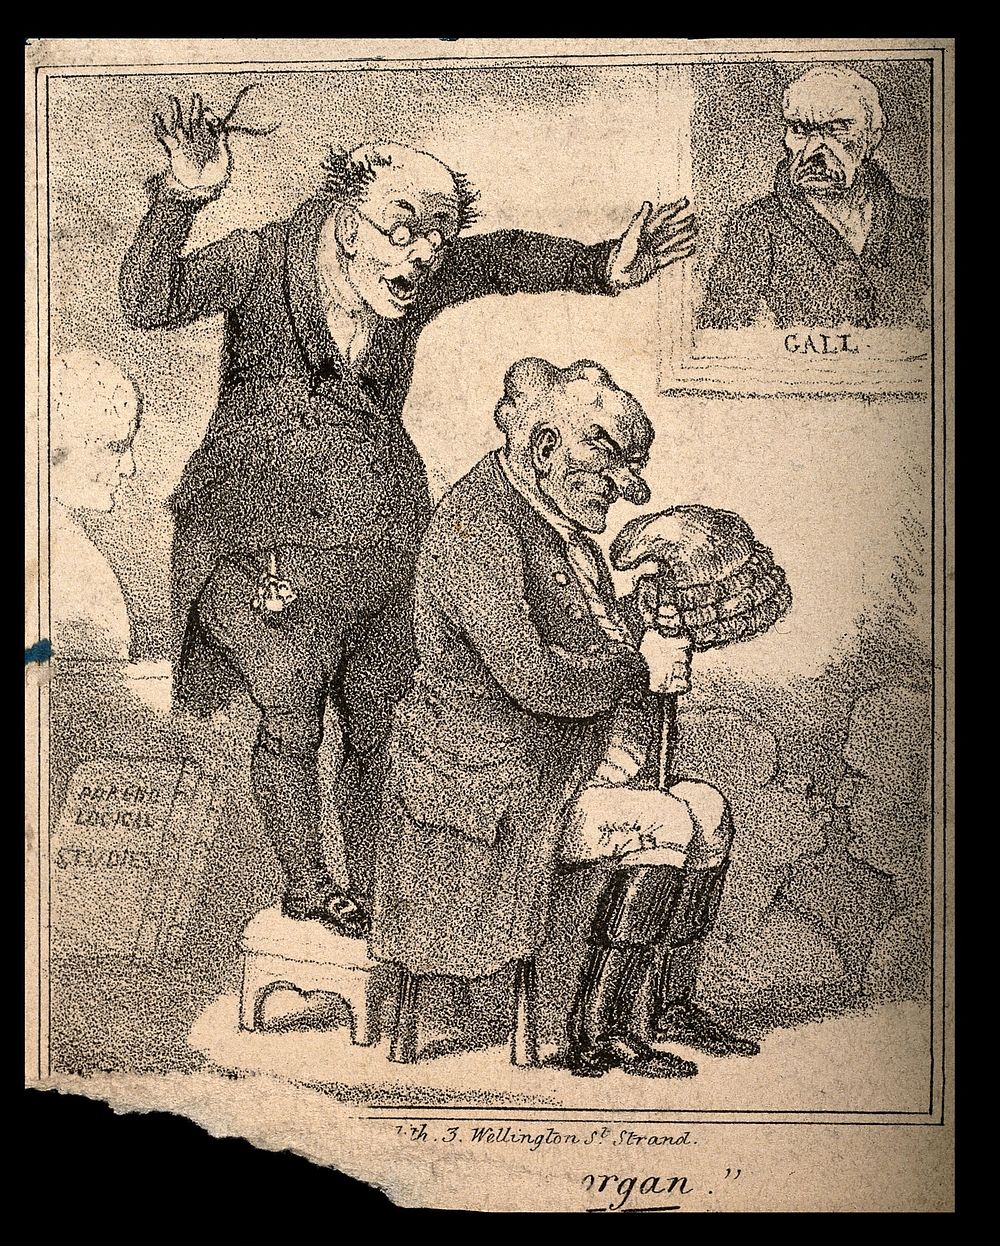 A phrenologist examining a man's characterful head. Lithograph.